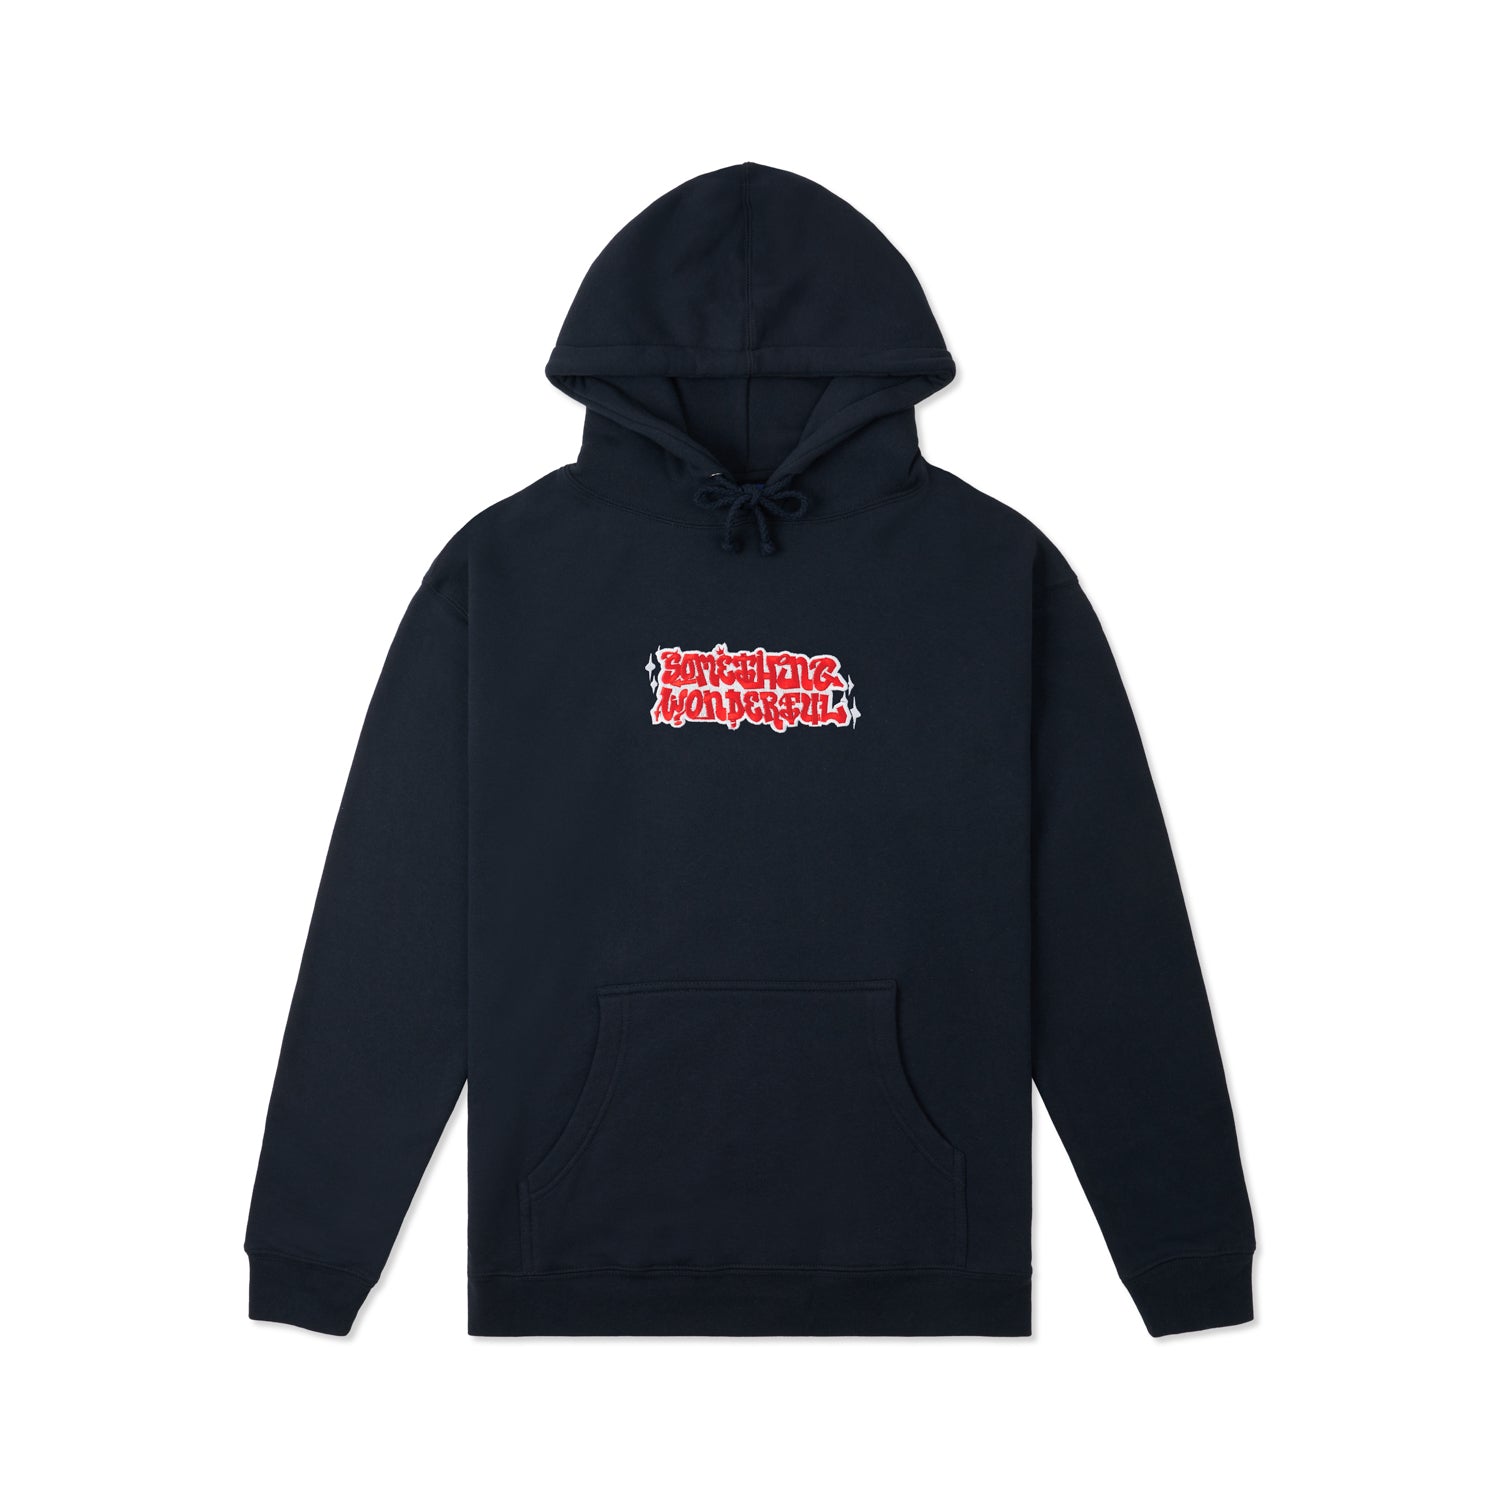 Navy hoody with red and white logo